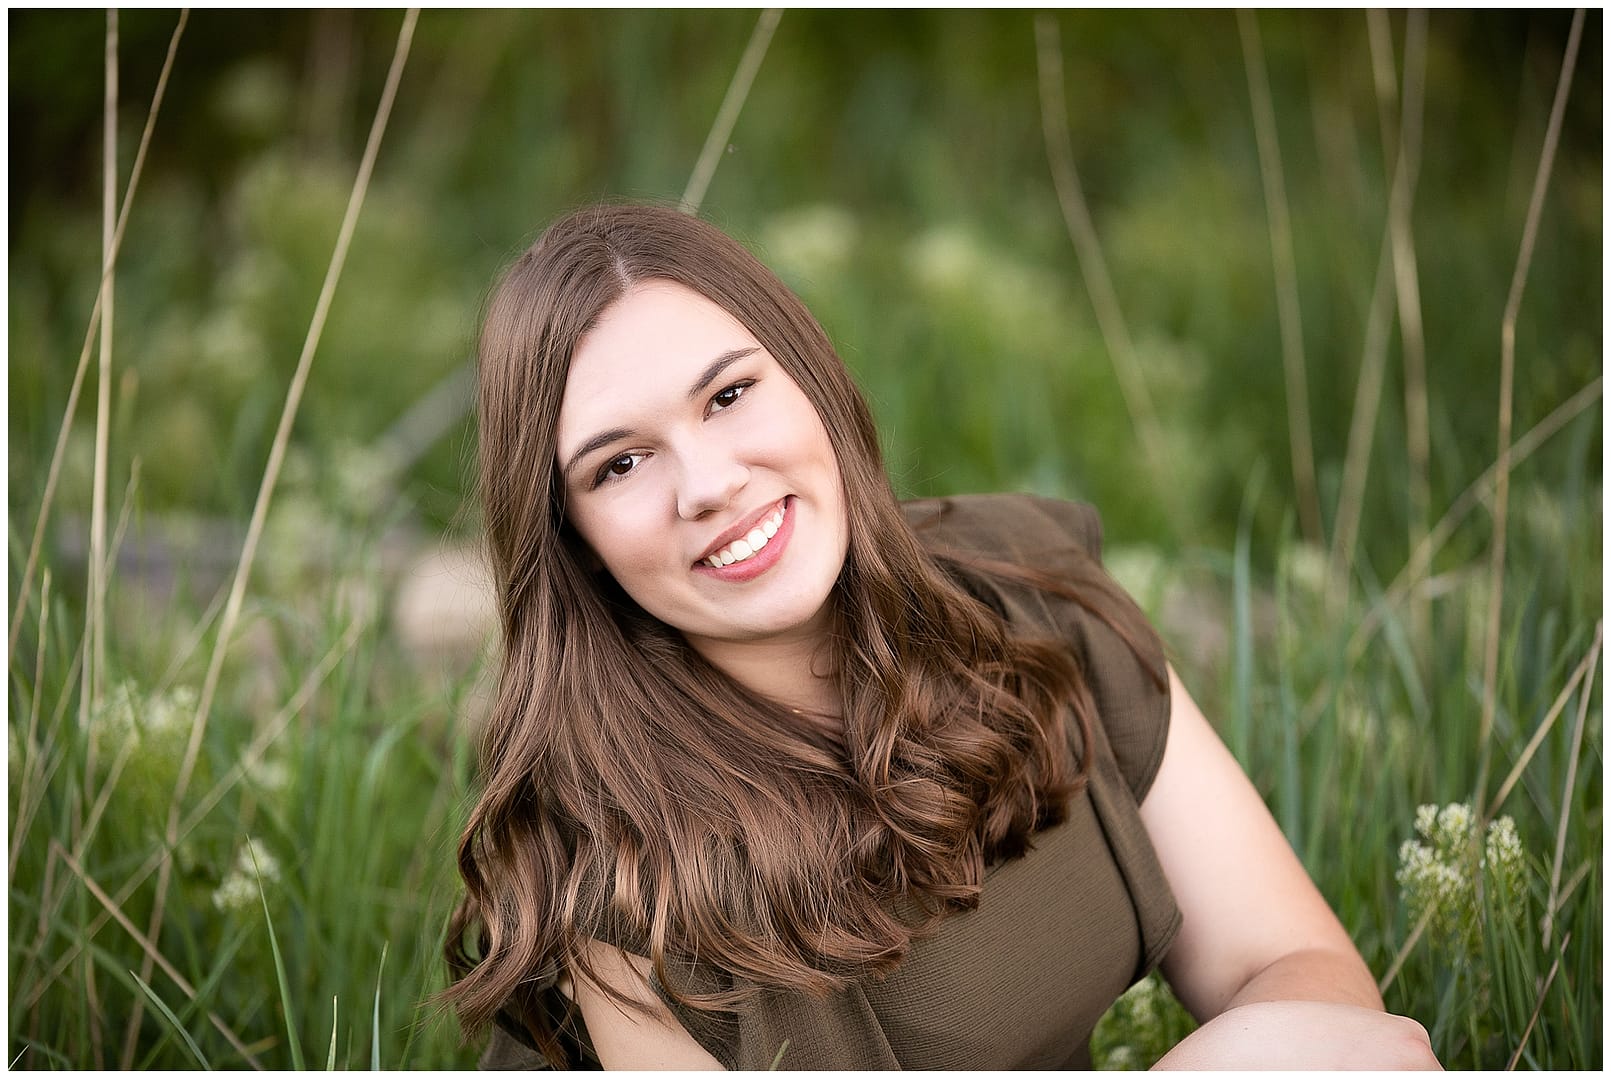 Outdoor Senior Headshot in field during Boise Senior Session. Photos by Tiffany Hix.